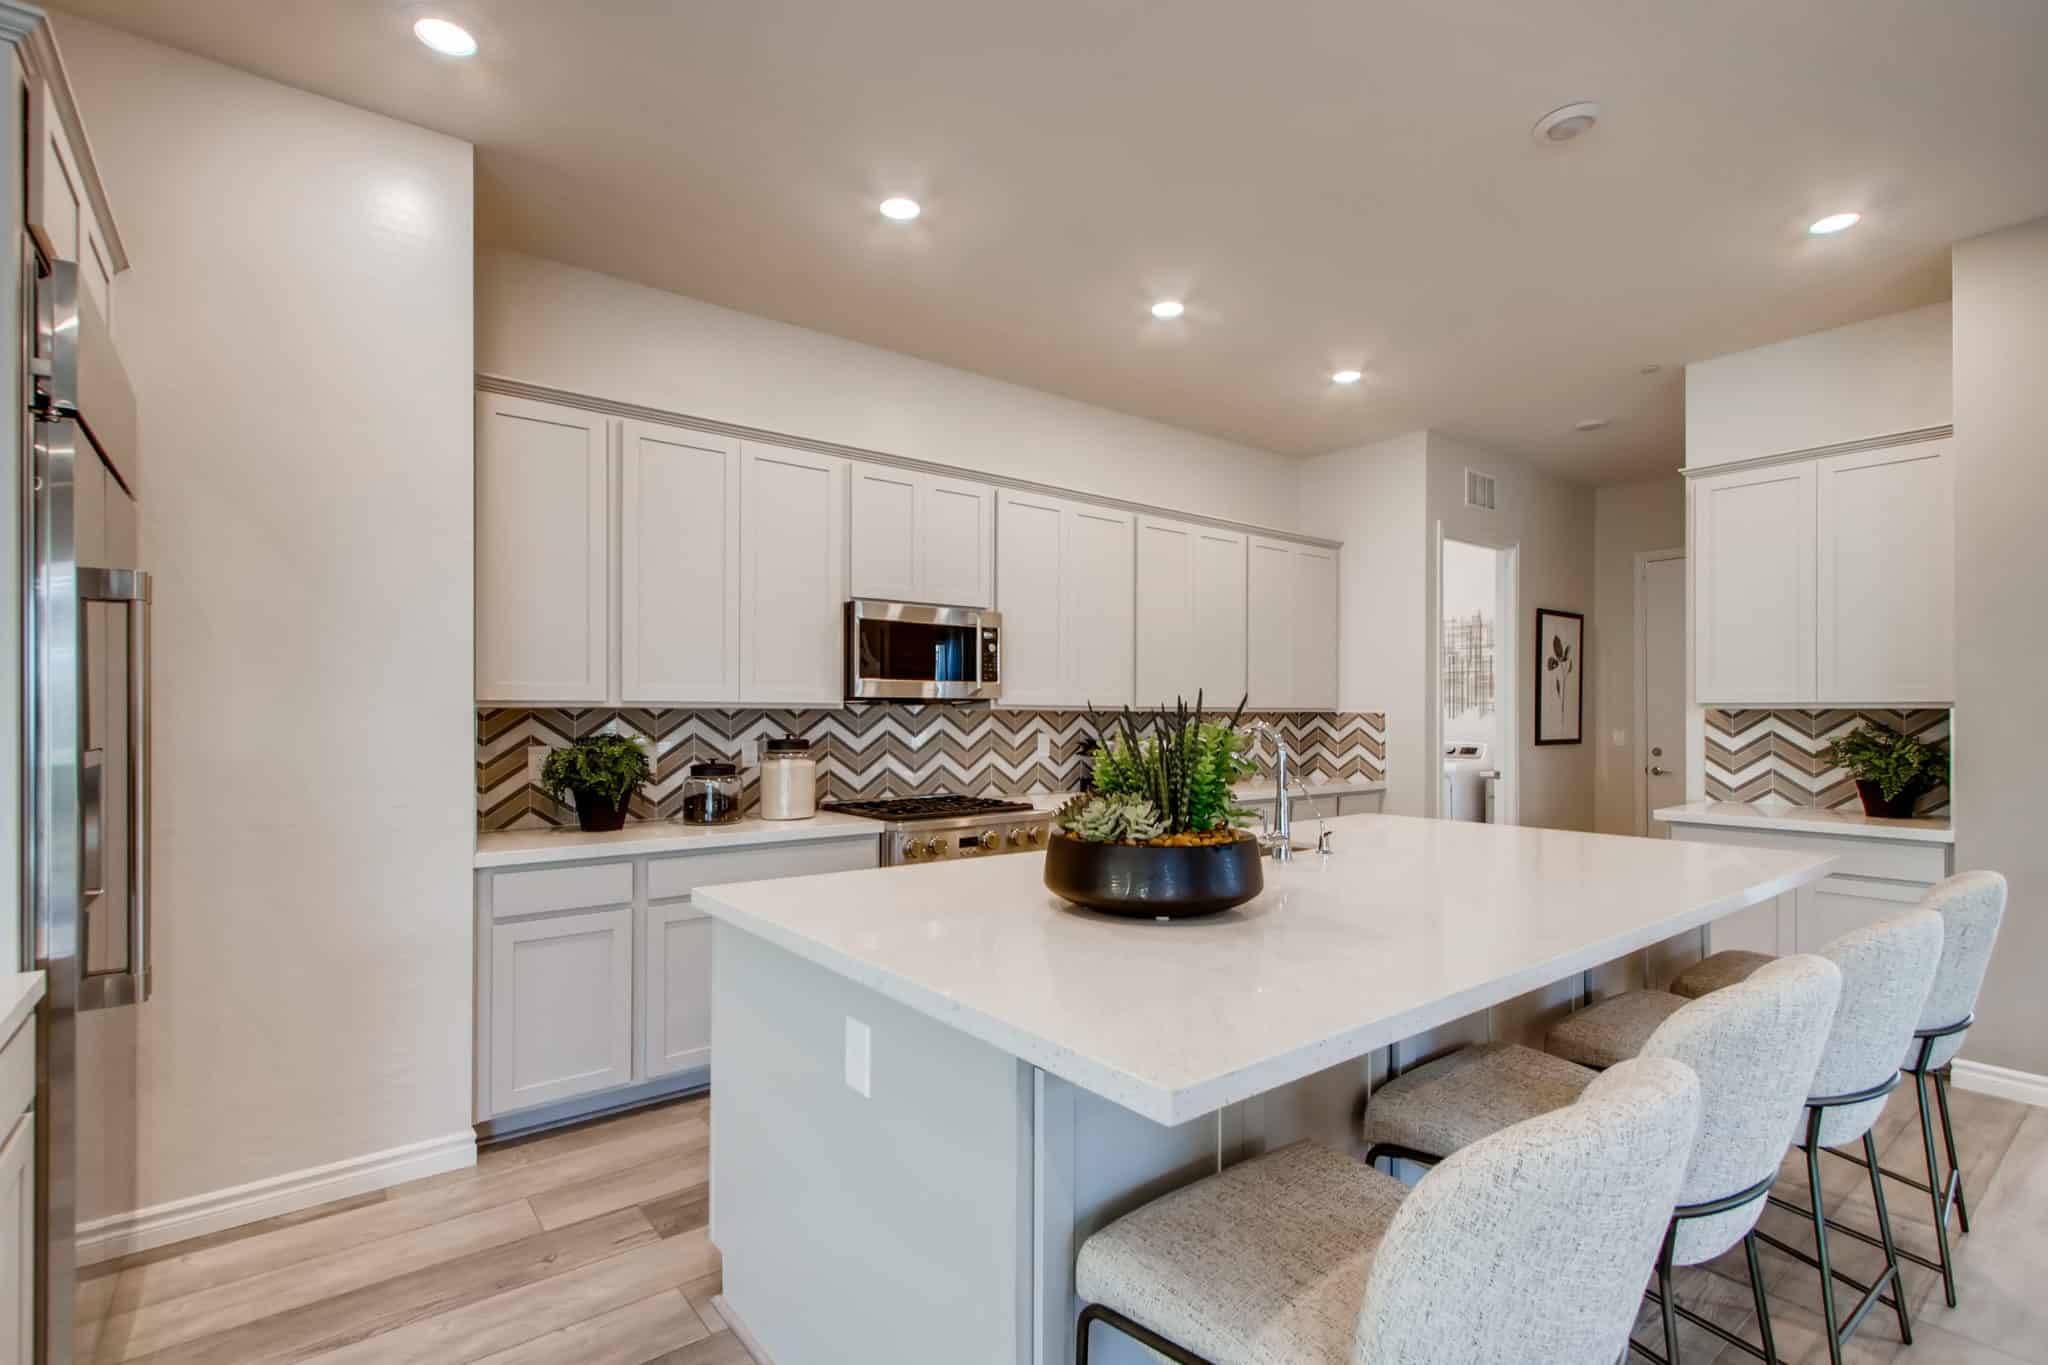 Kitchen of Sloan model at Heritage by Lennar